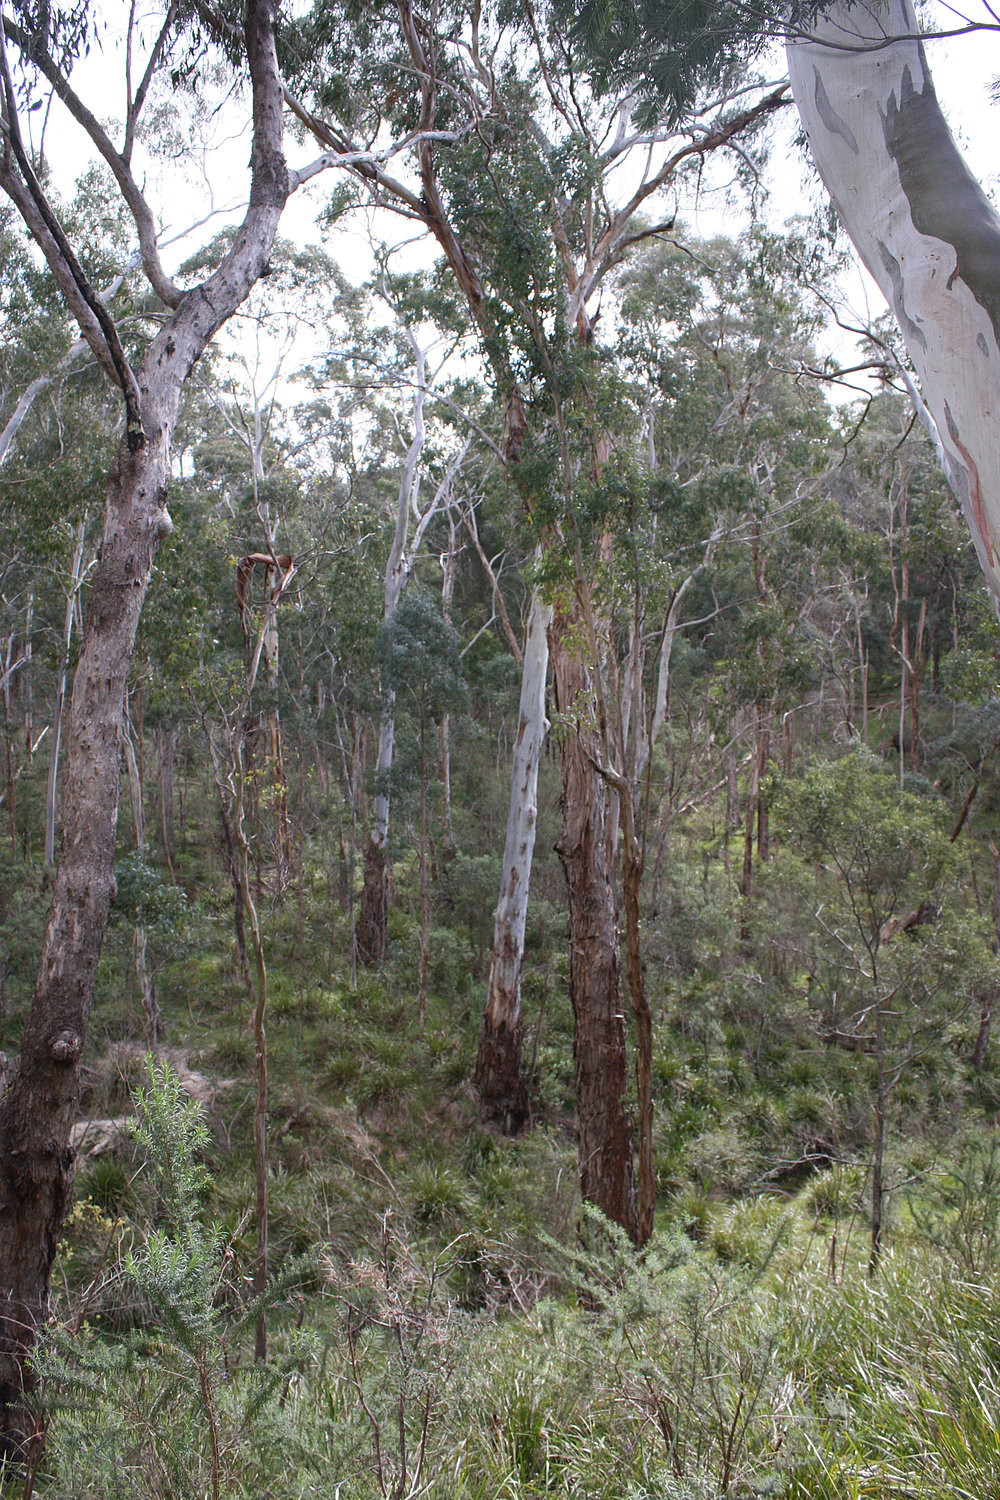  A range of eucalypts on the same slope. Image: Michael Smith 